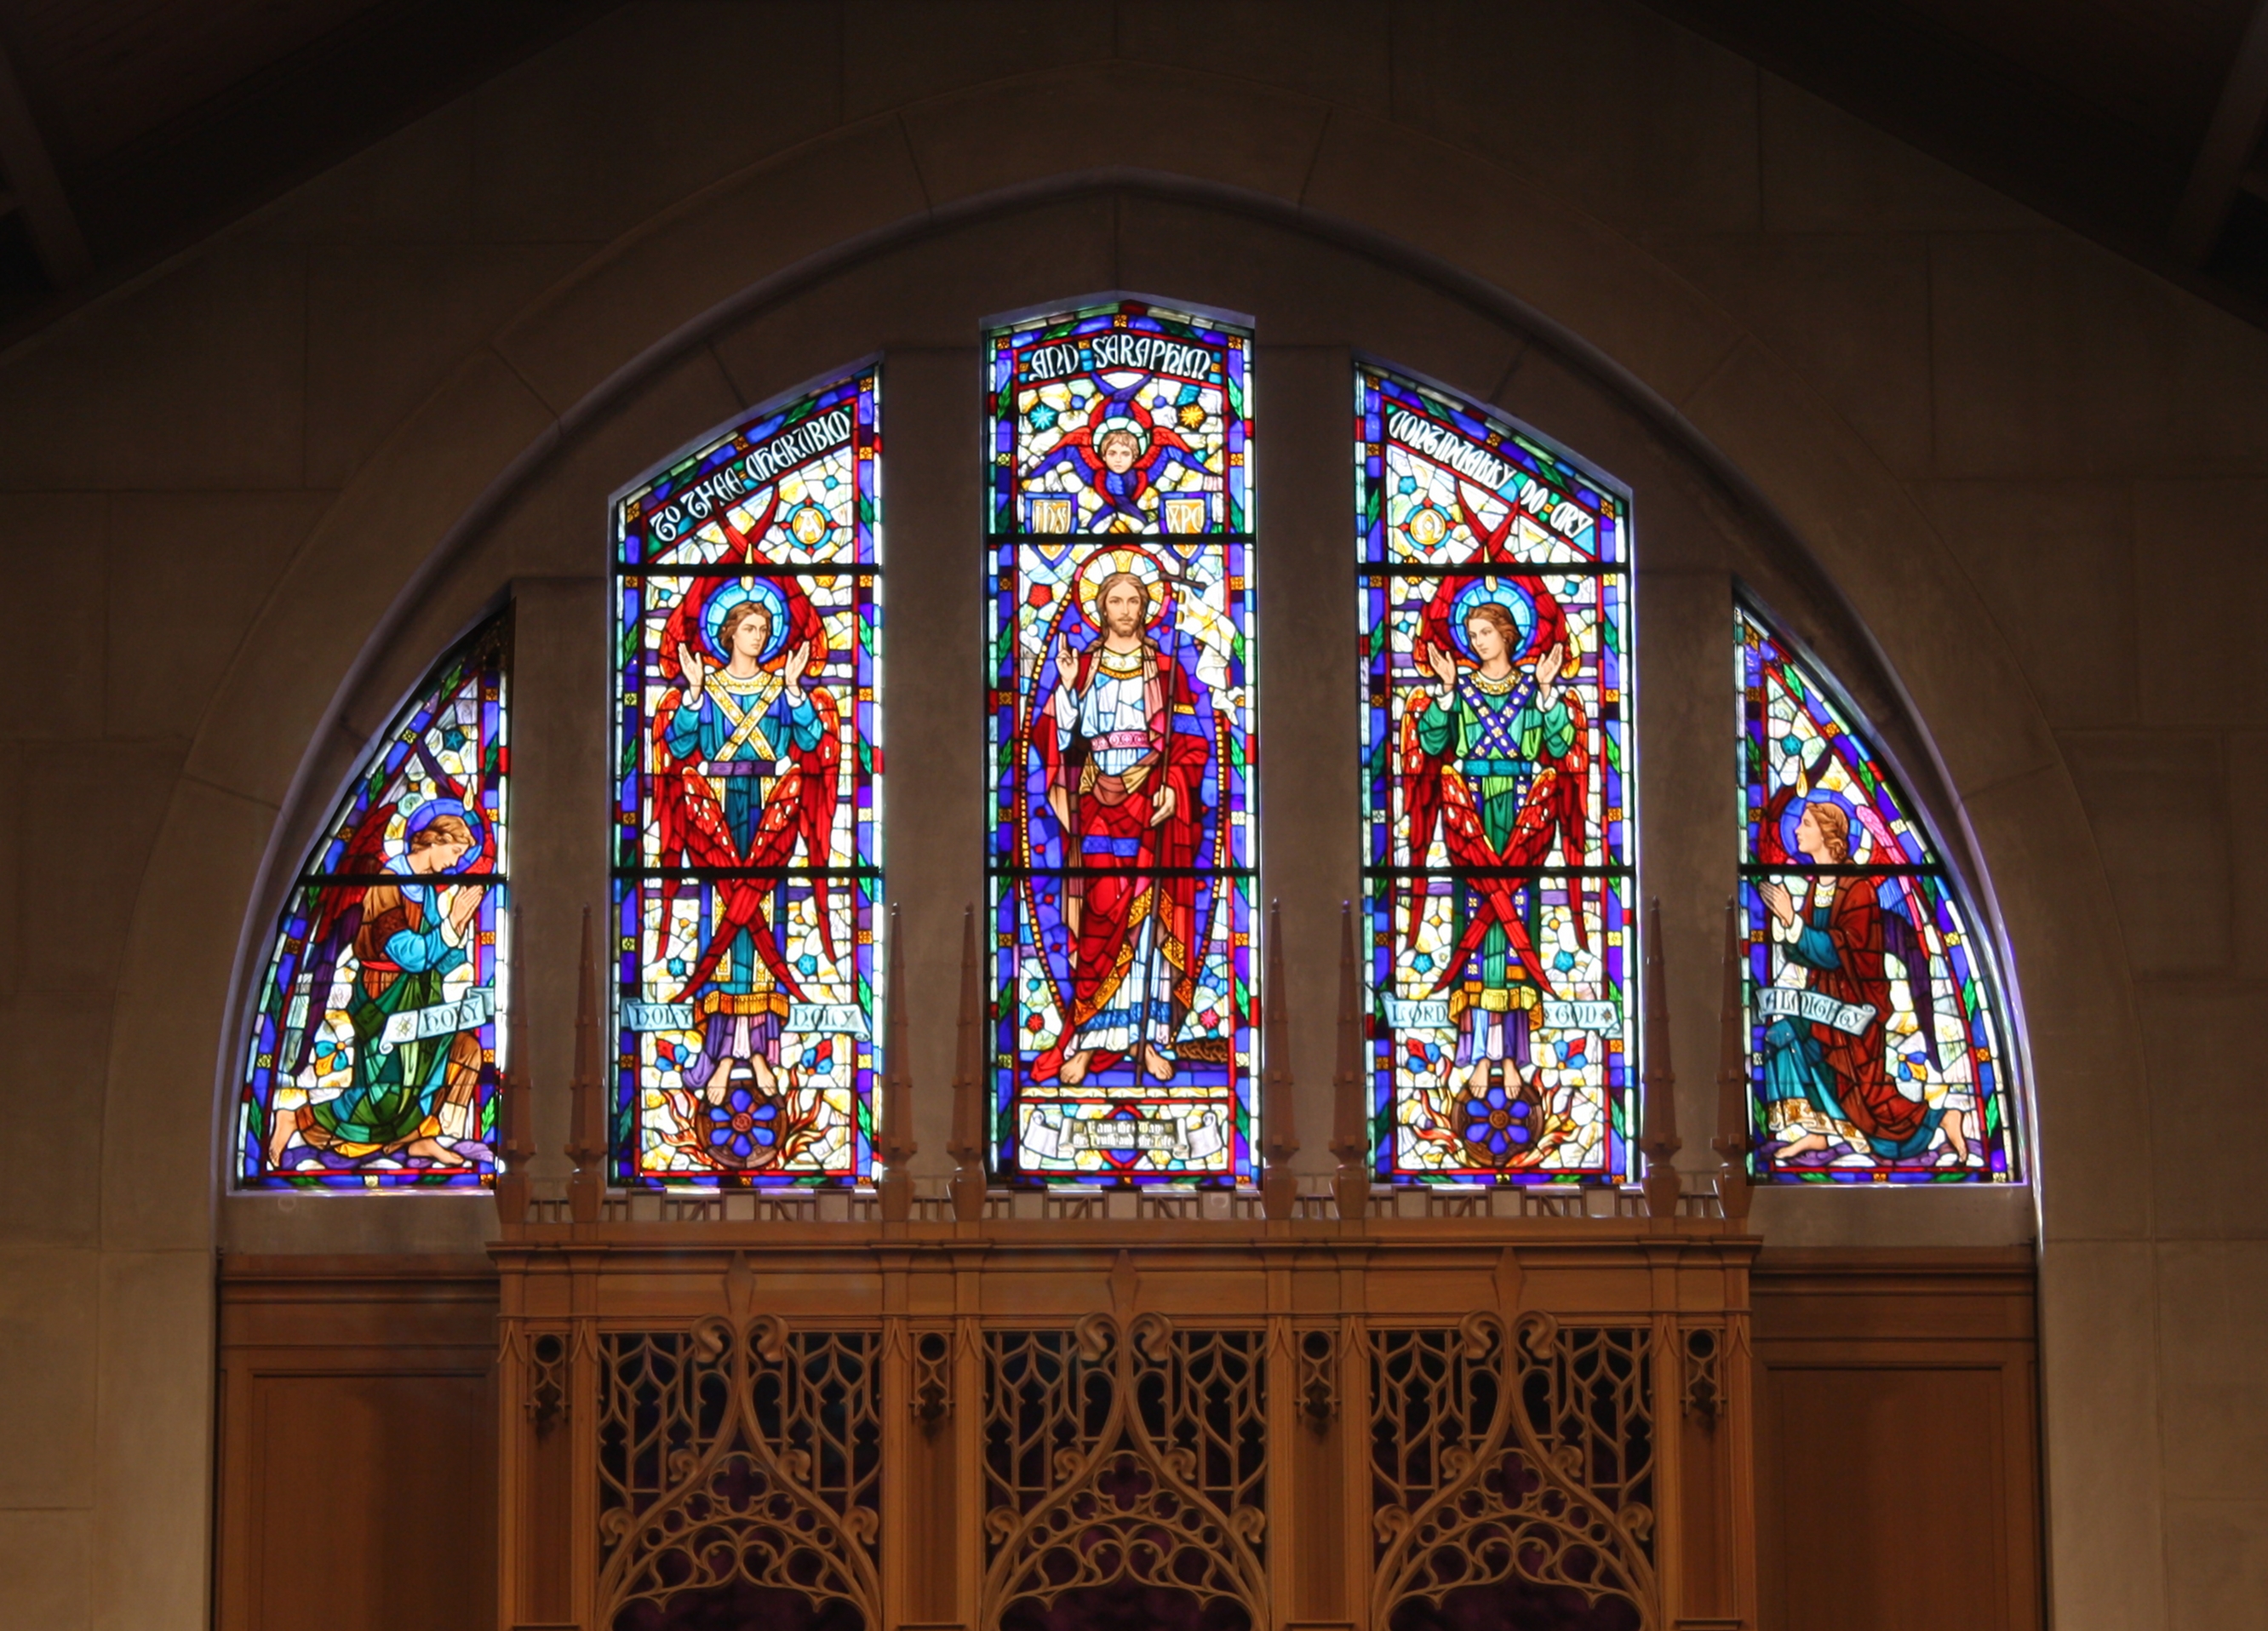 Restoring Stained Glass Windows at White Plains Presbyterian Church